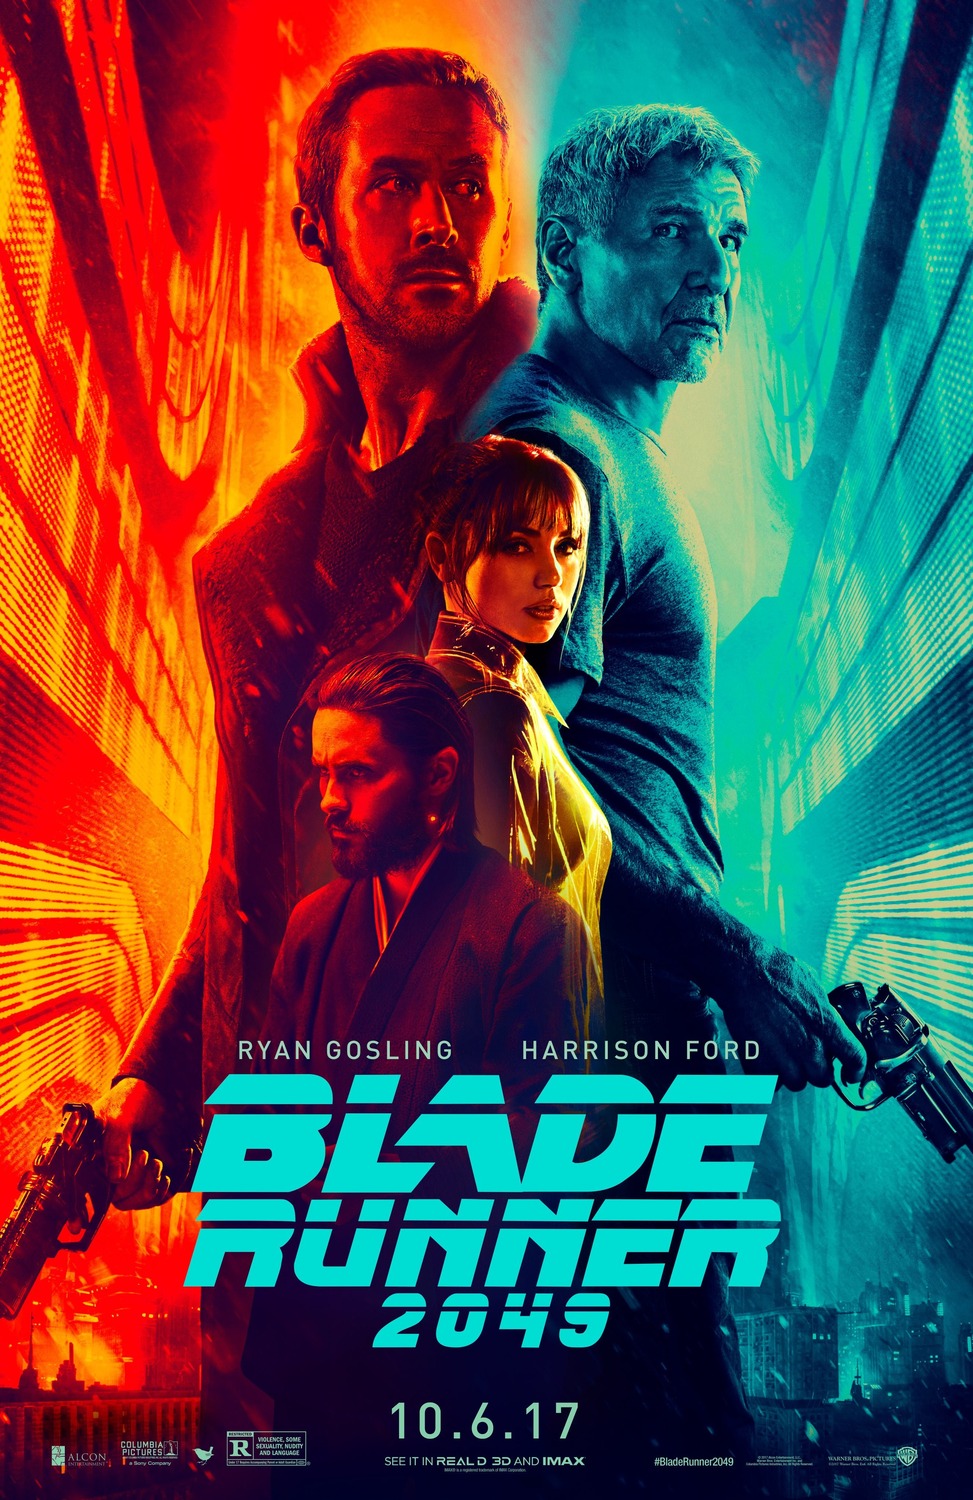 Extra Large Movie Poster Image for Blade Runner 2049 (#5 of 32)